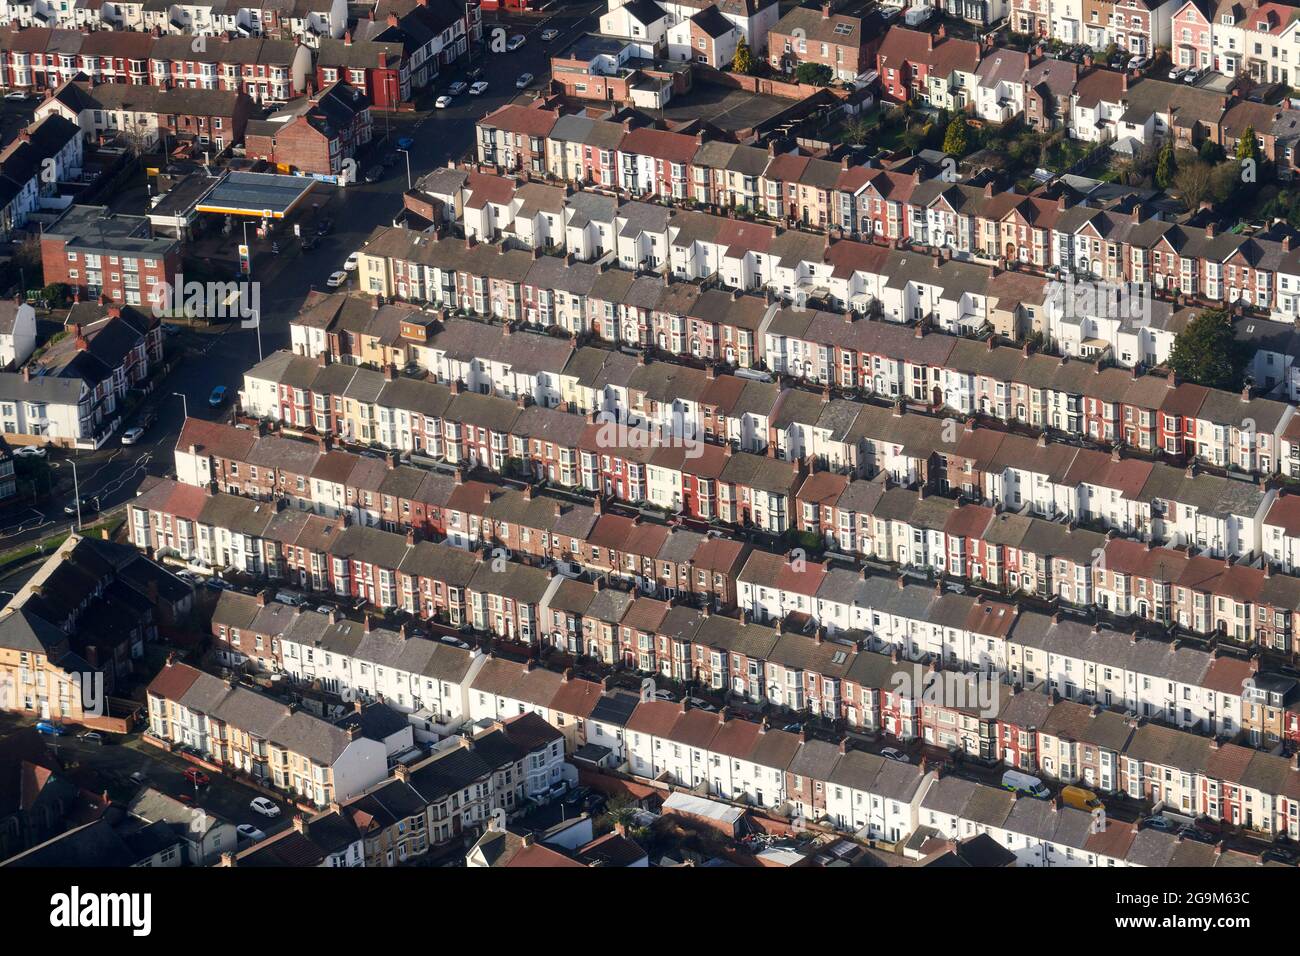 Terraced Houses Liverpool Merseyside North West England Uk Shot From The Air 2G9M63C 